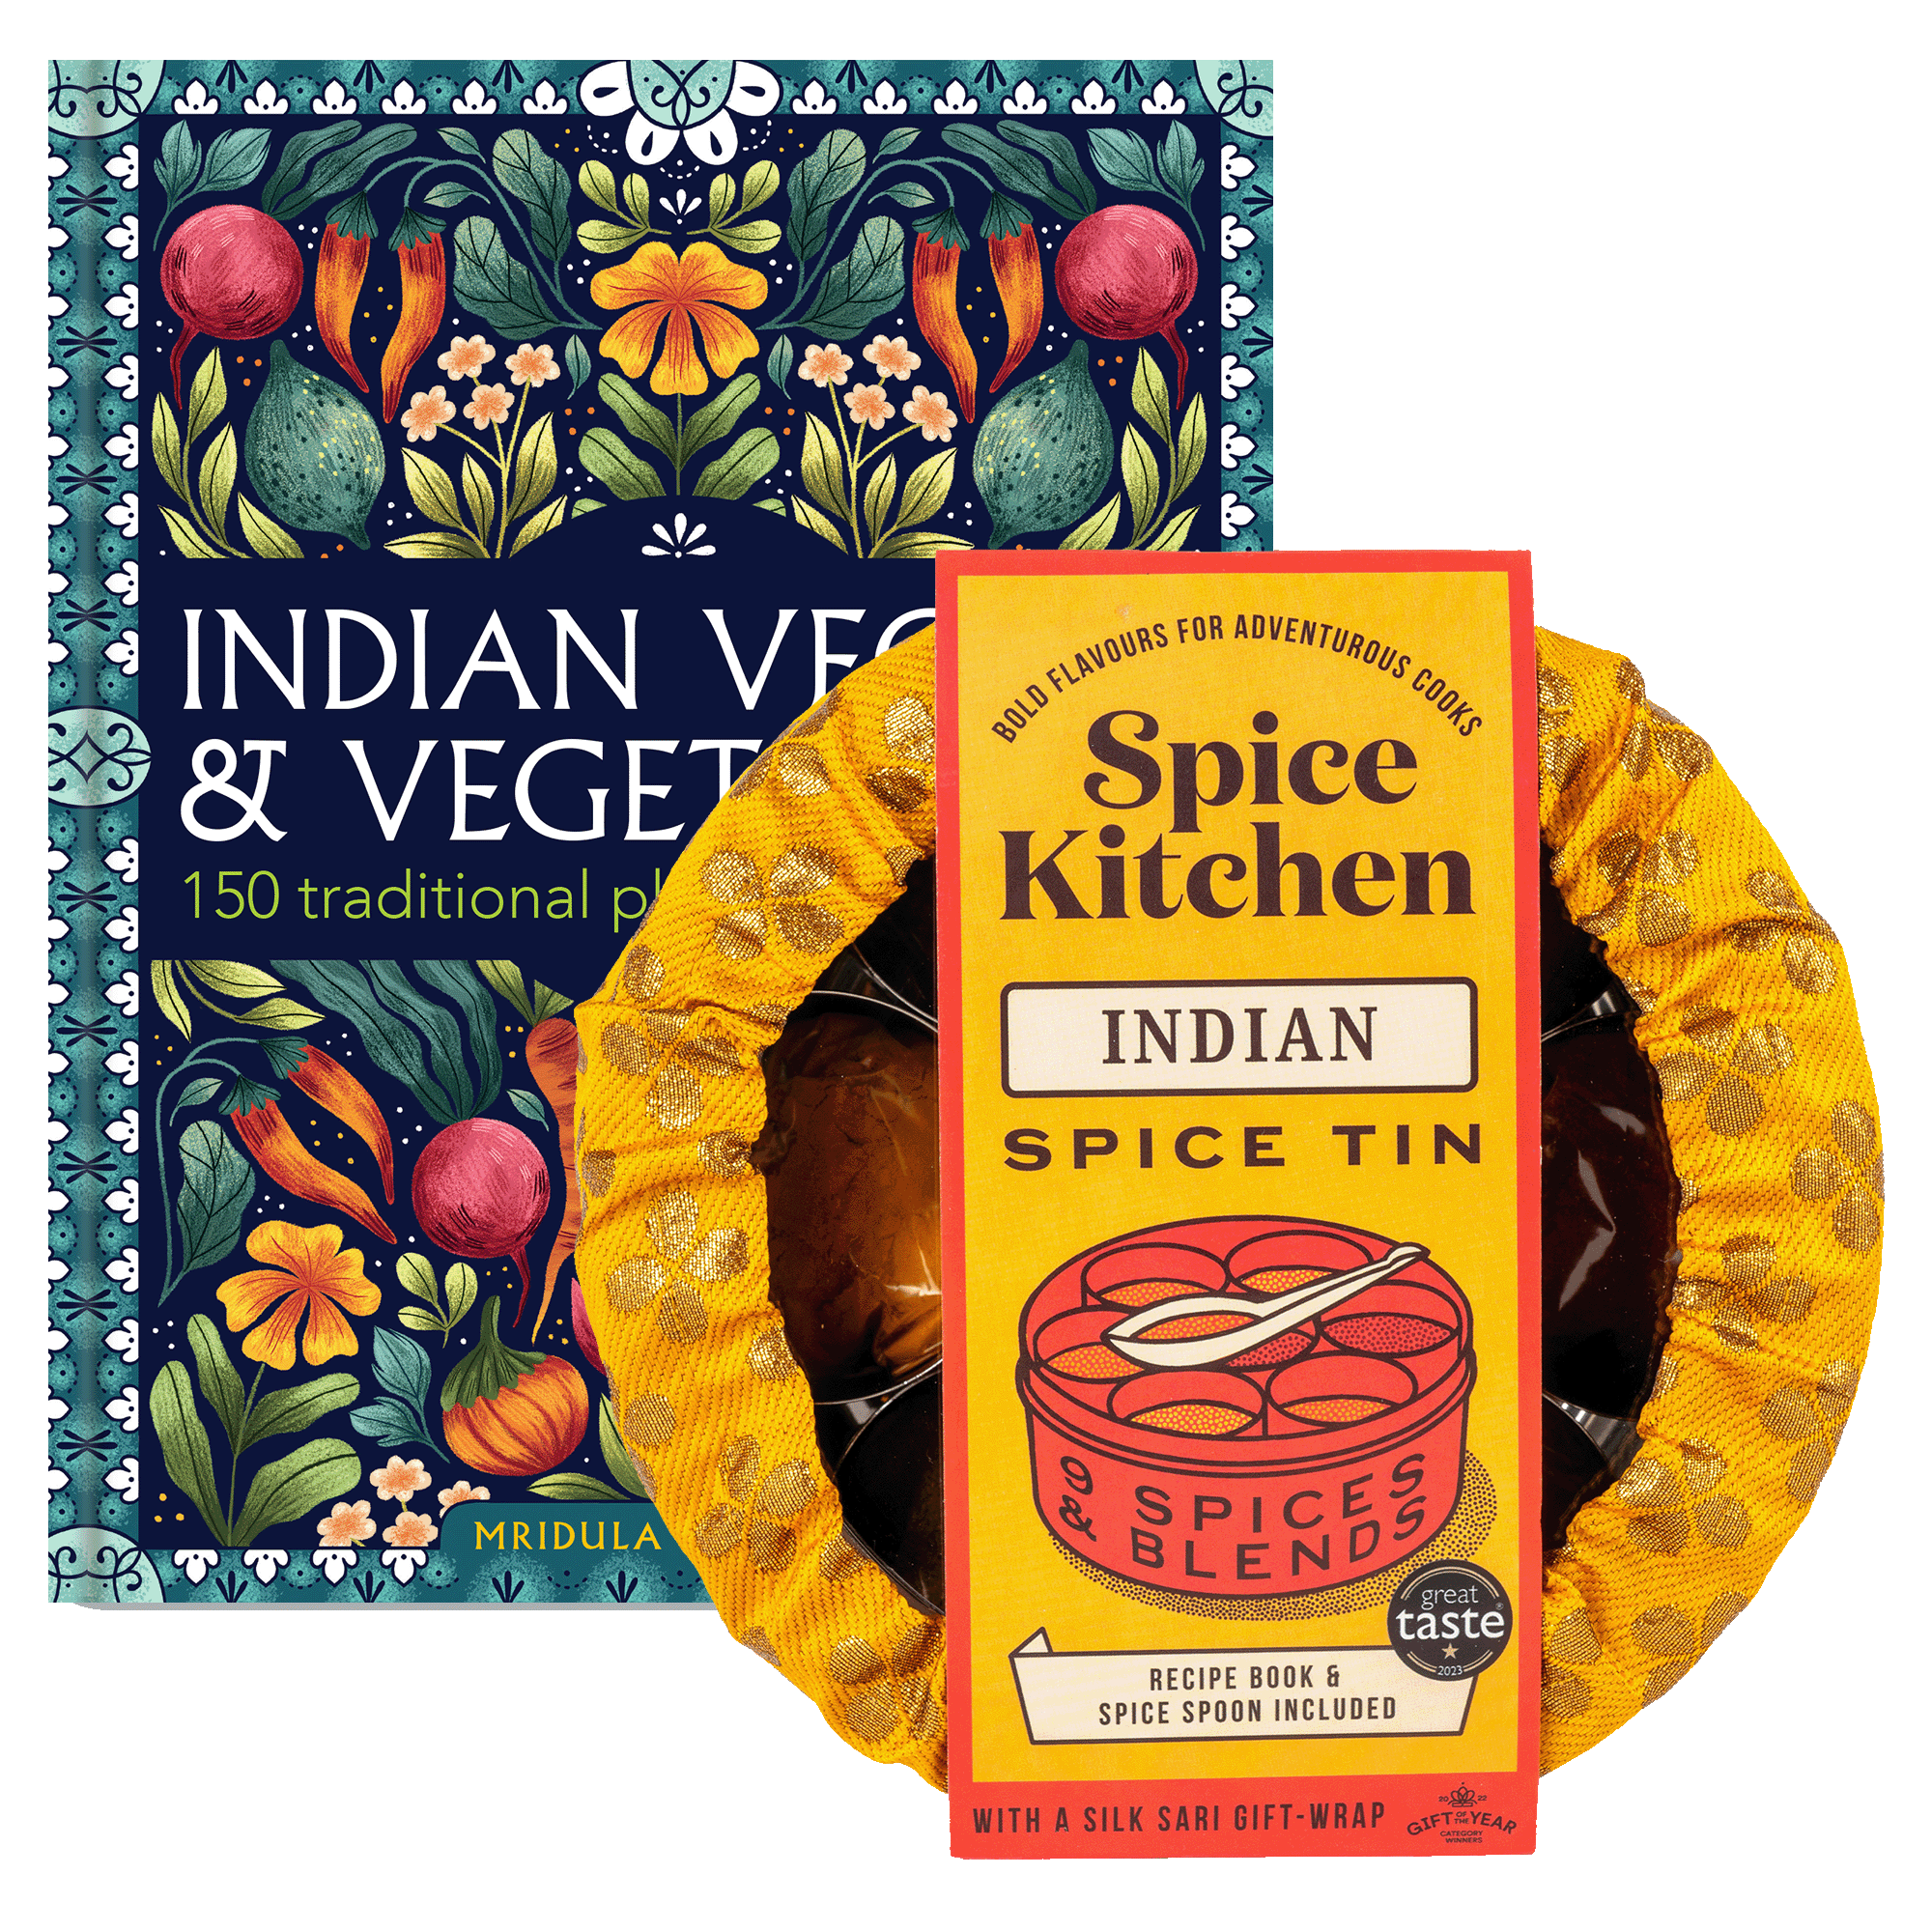 Indian Vegan Cookbook and Indian Spice Tin with 9 spices  | Gift of the Year Winner - Spice Kitchen™ - Spices, Spice Blends, Gifts & Cookware